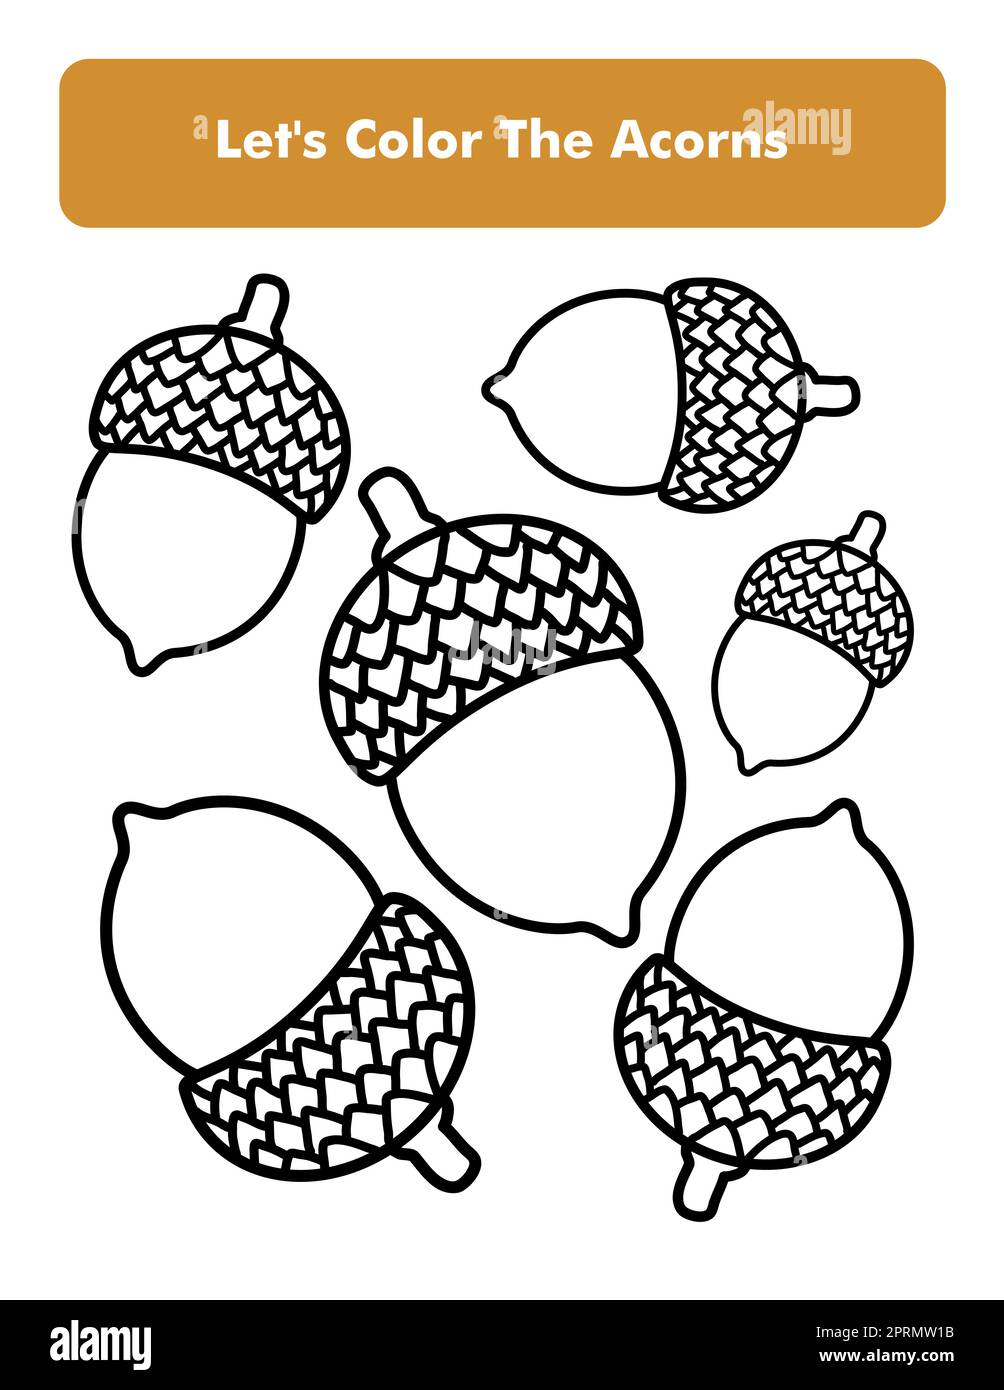 Acorns coloring book page in letter page size children coloring worksheet premium vector element stock photo